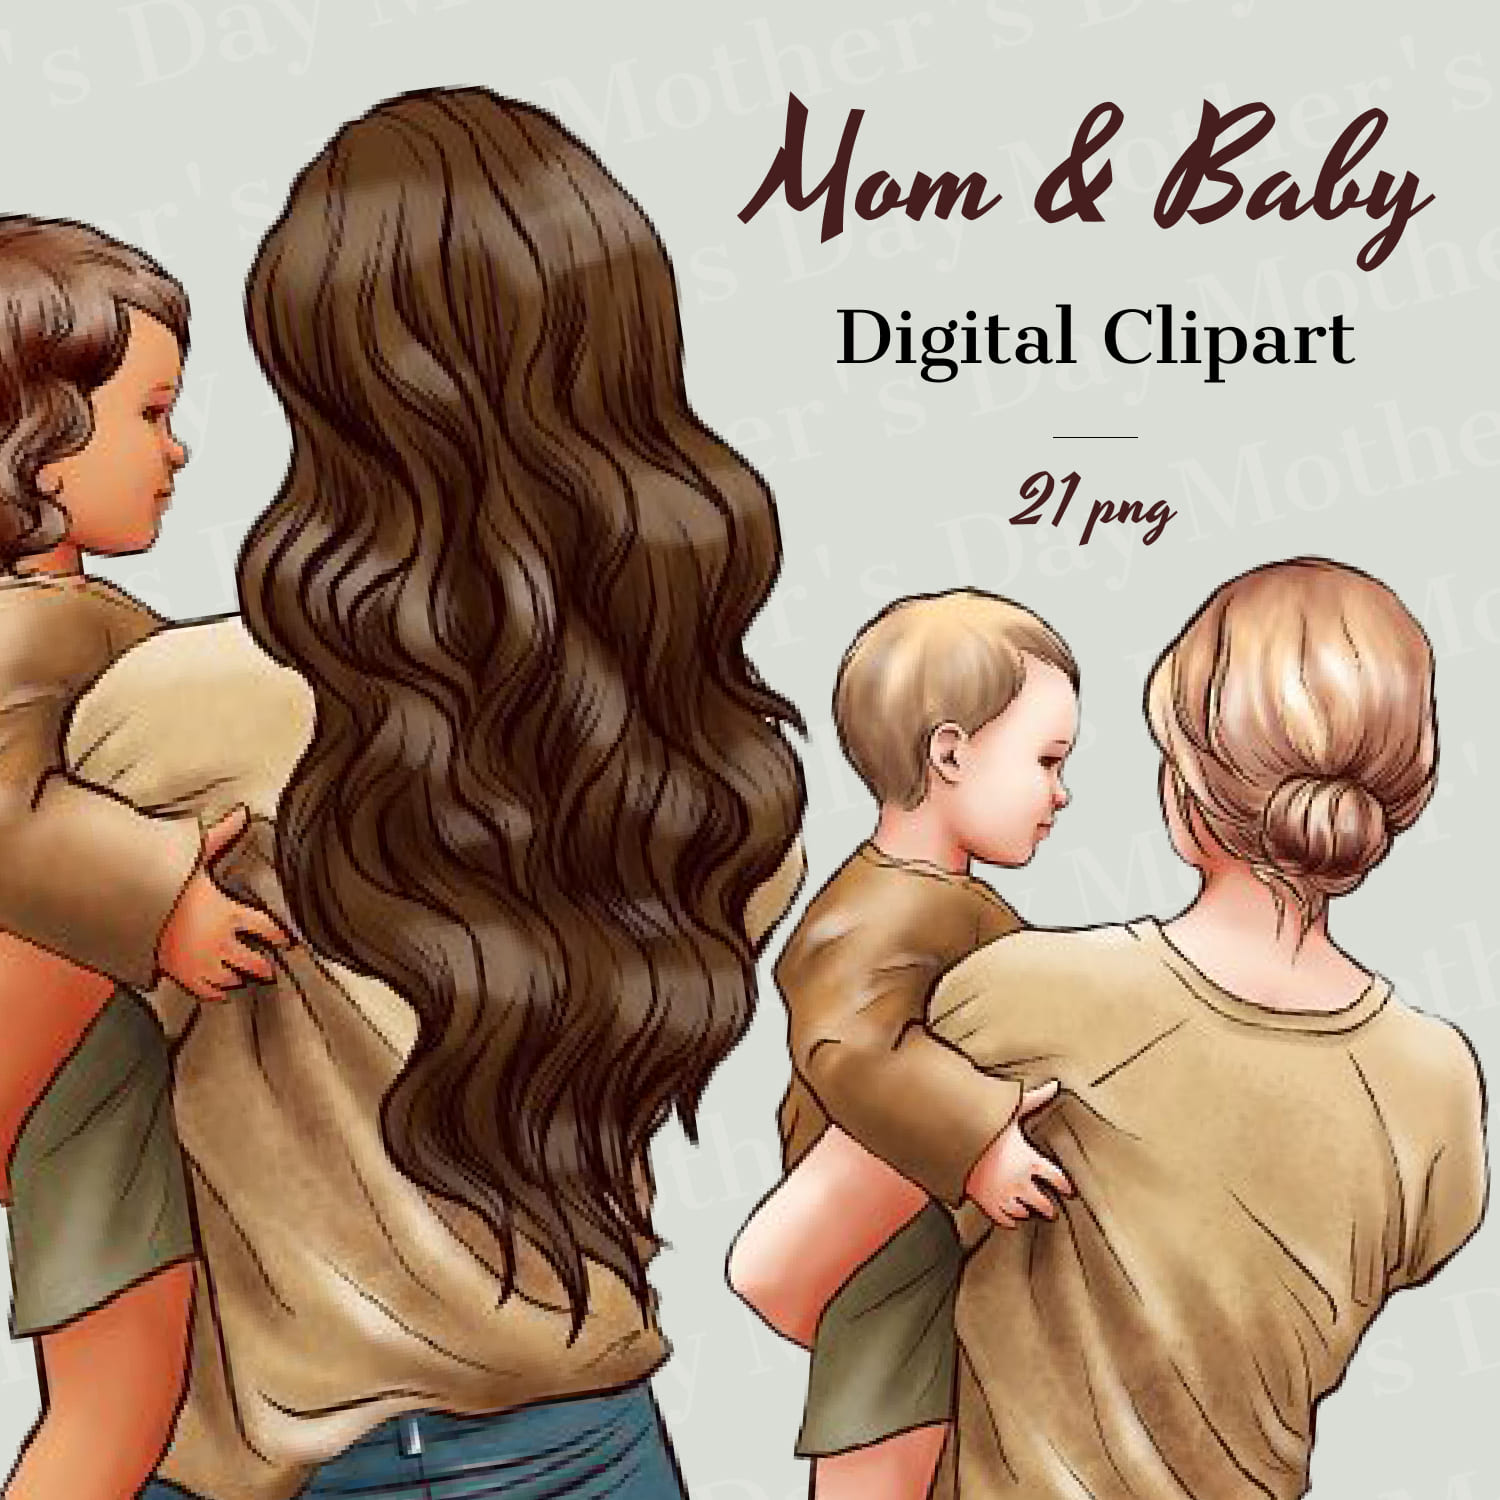 Mother’s Day Clipart, Mom And Baby.